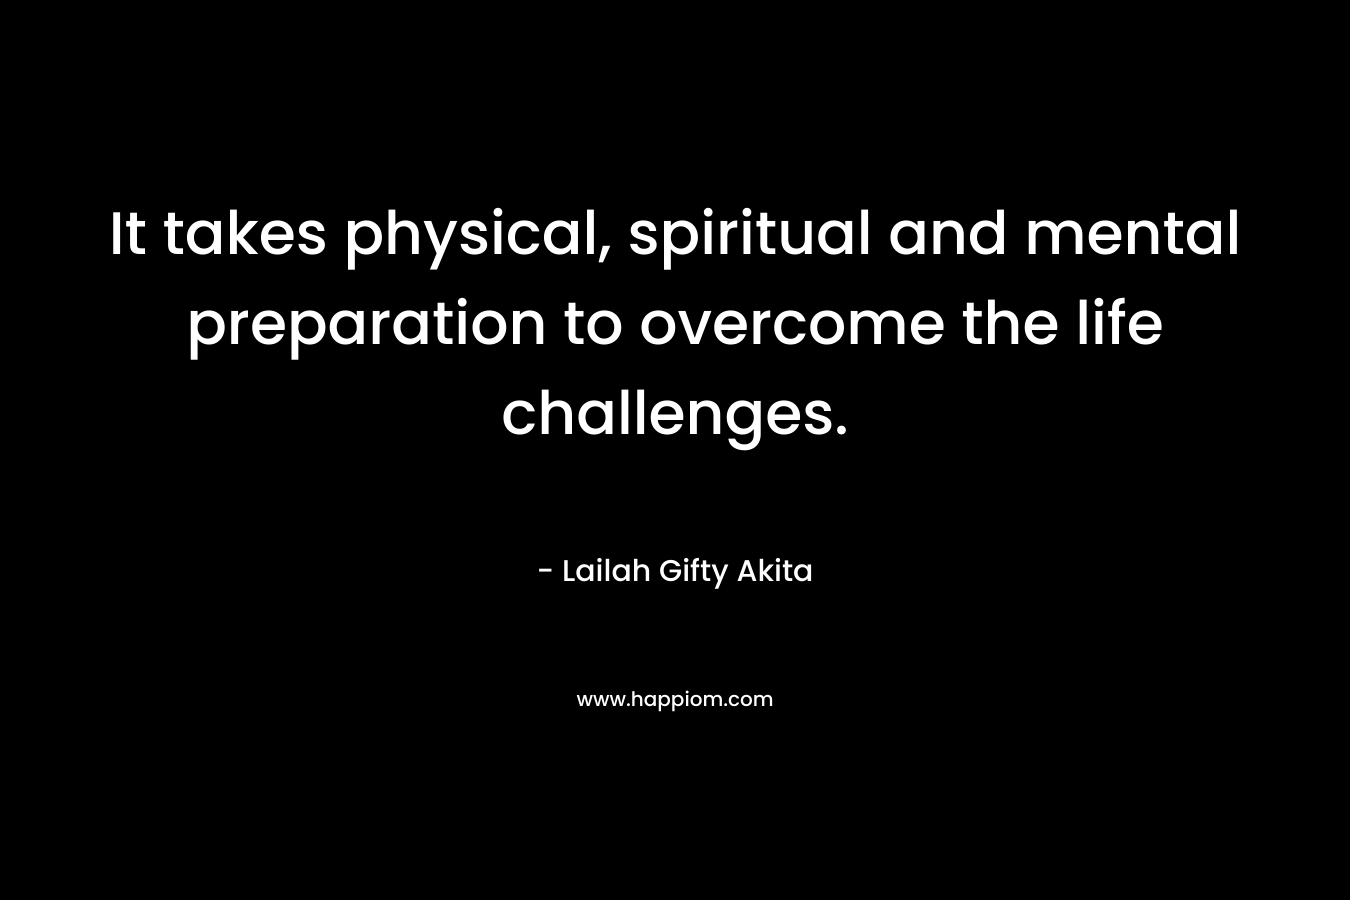 It takes physical, spiritual and mental preparation to overcome the life challenges. – Lailah Gifty Akita